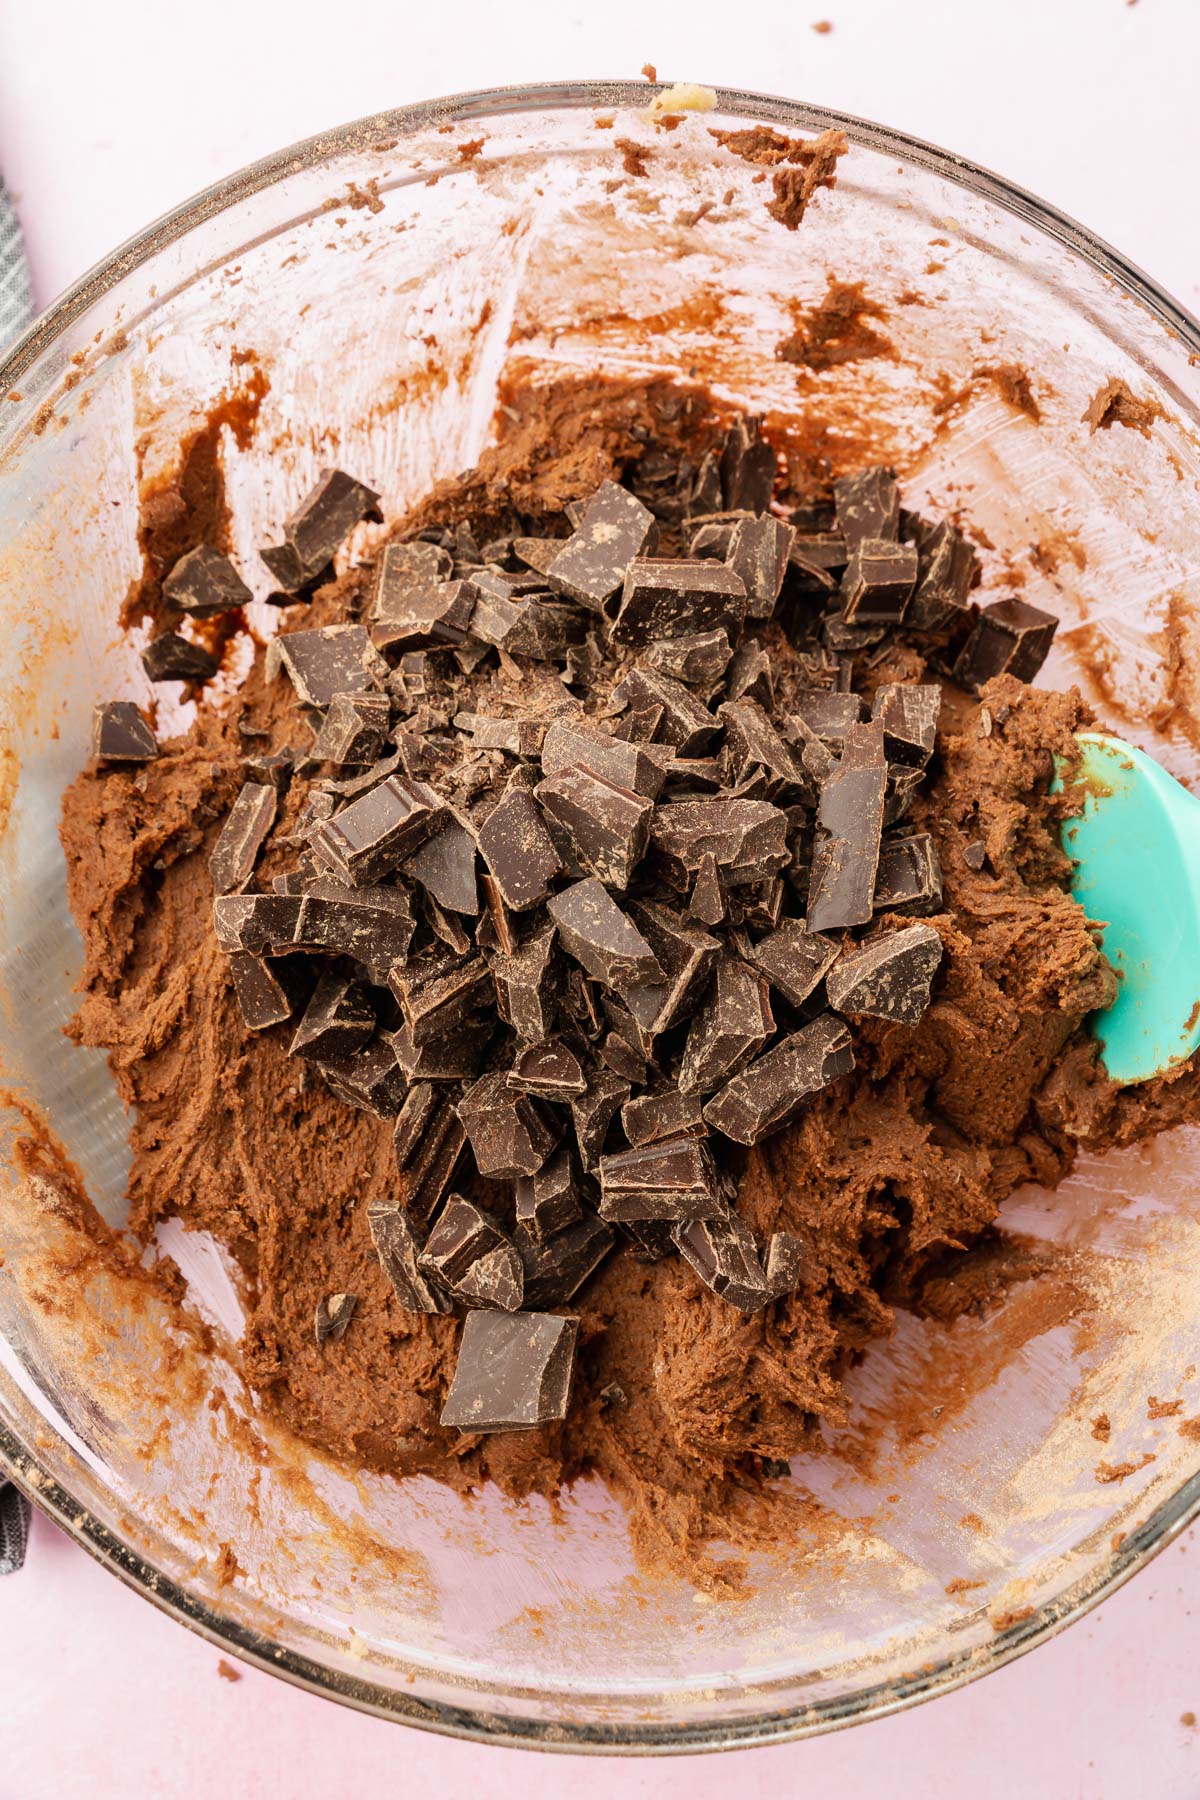 A gluten-free chocolate cookie dough topped with chopped chocolate in a glass mixing bowl with a blue spatula.